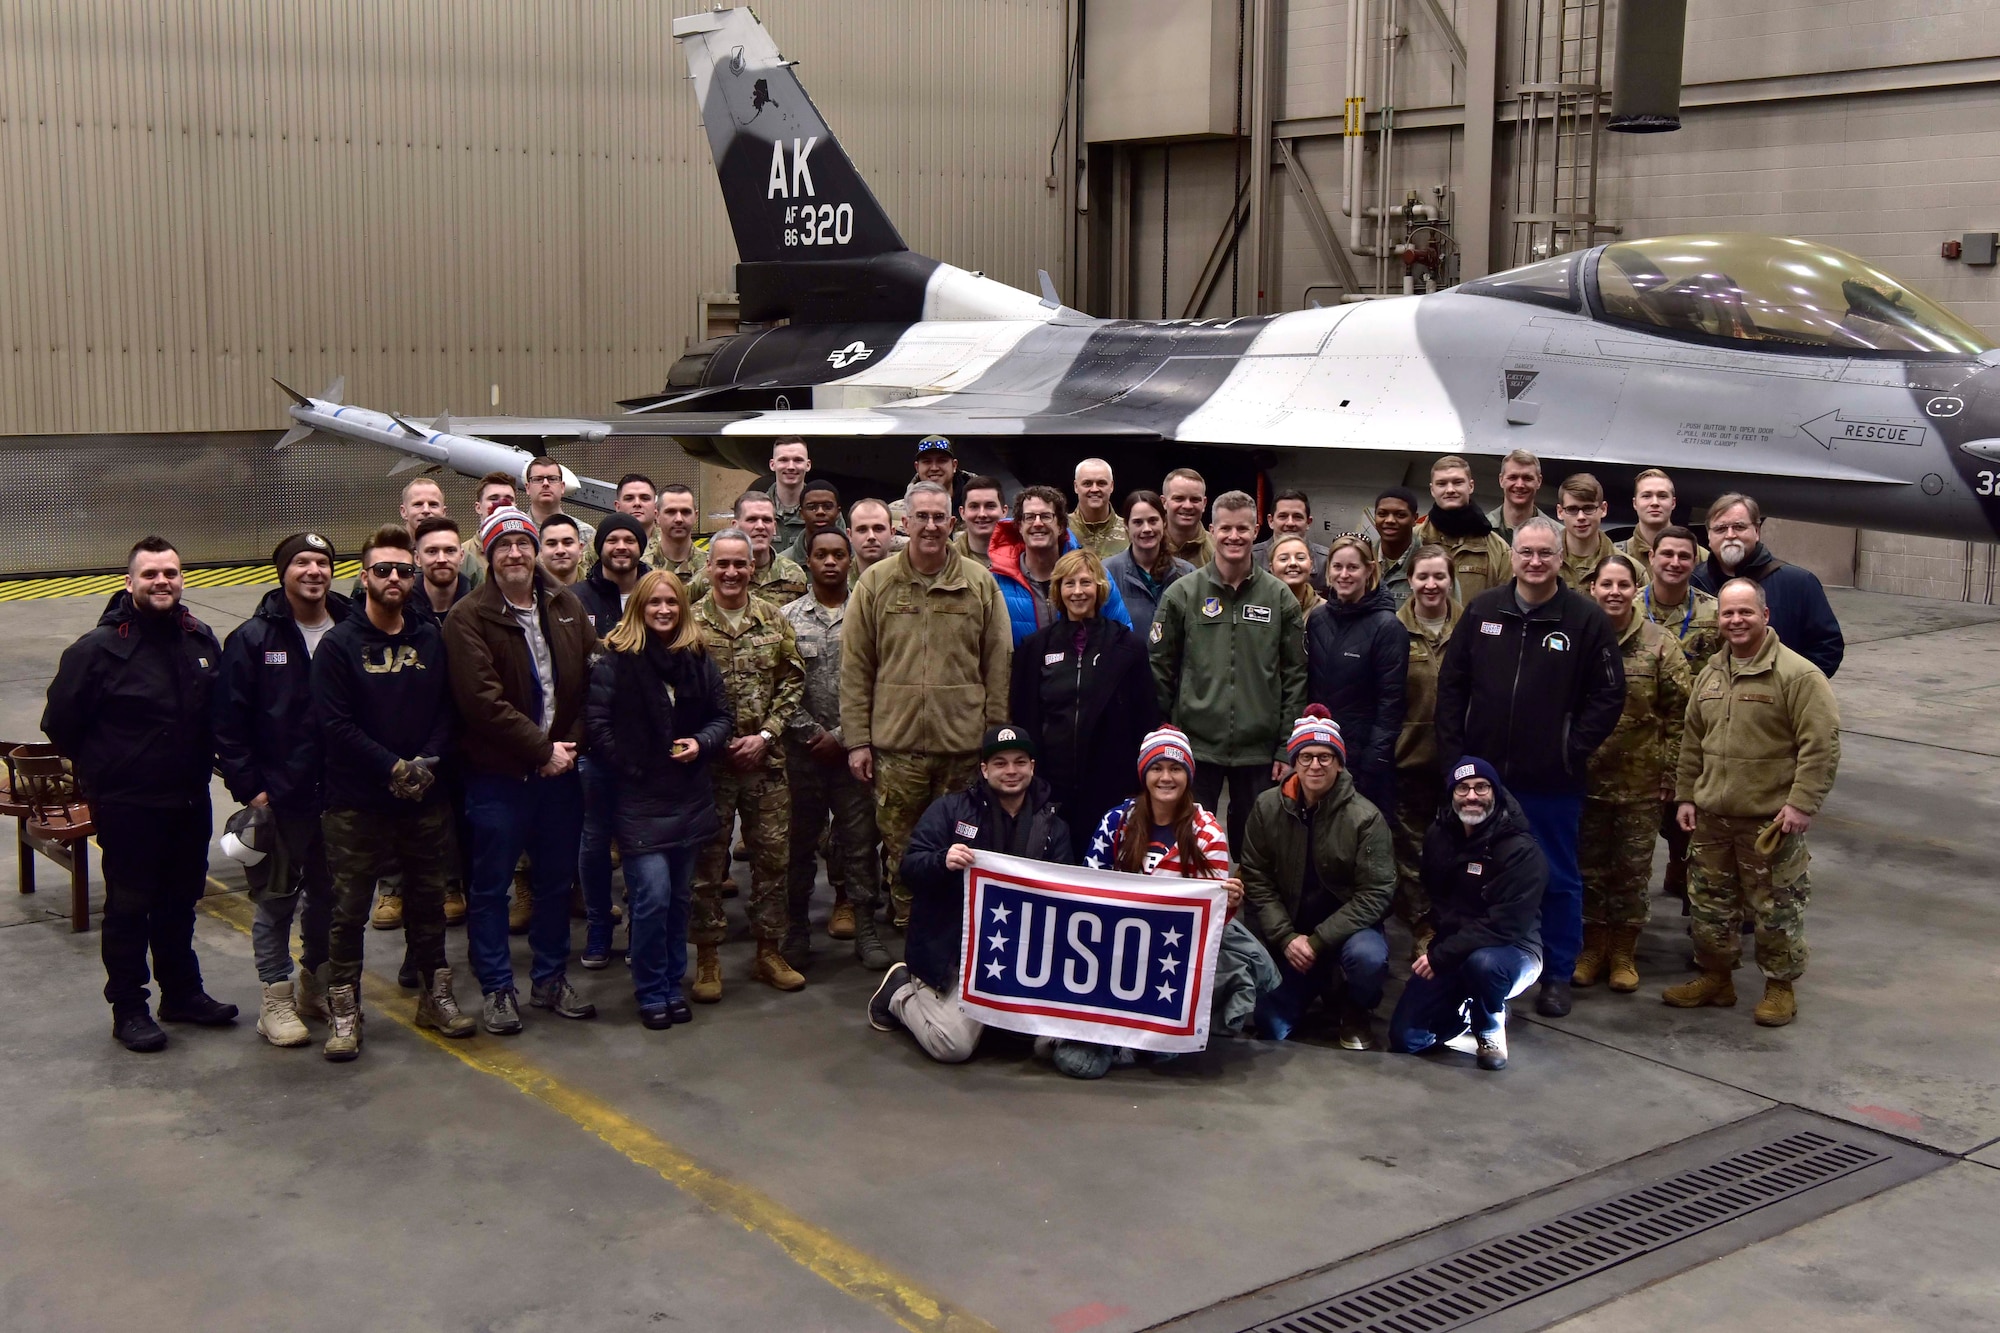 U.S. Air Force Gen. John E. Hyten, Vice Chairman of the Joint Chiefs of Staff, Senior Enlisted Advisor to the Chairman of the Joint Chiefs of Staff Ramón “CZ” Colón-López, and a United Service Organizations tour group pose for a photo with Airmen in front of an 18th Aggressor Squadron F-16 Fighting Falcon on Eielson Air Force Base Alaska, March 2, 2020. The group held multiple meet-and-greets around the base to learn more about Eielson’s mission. (U.S. Air Force photo by Senior Airman Beaux Hebert)